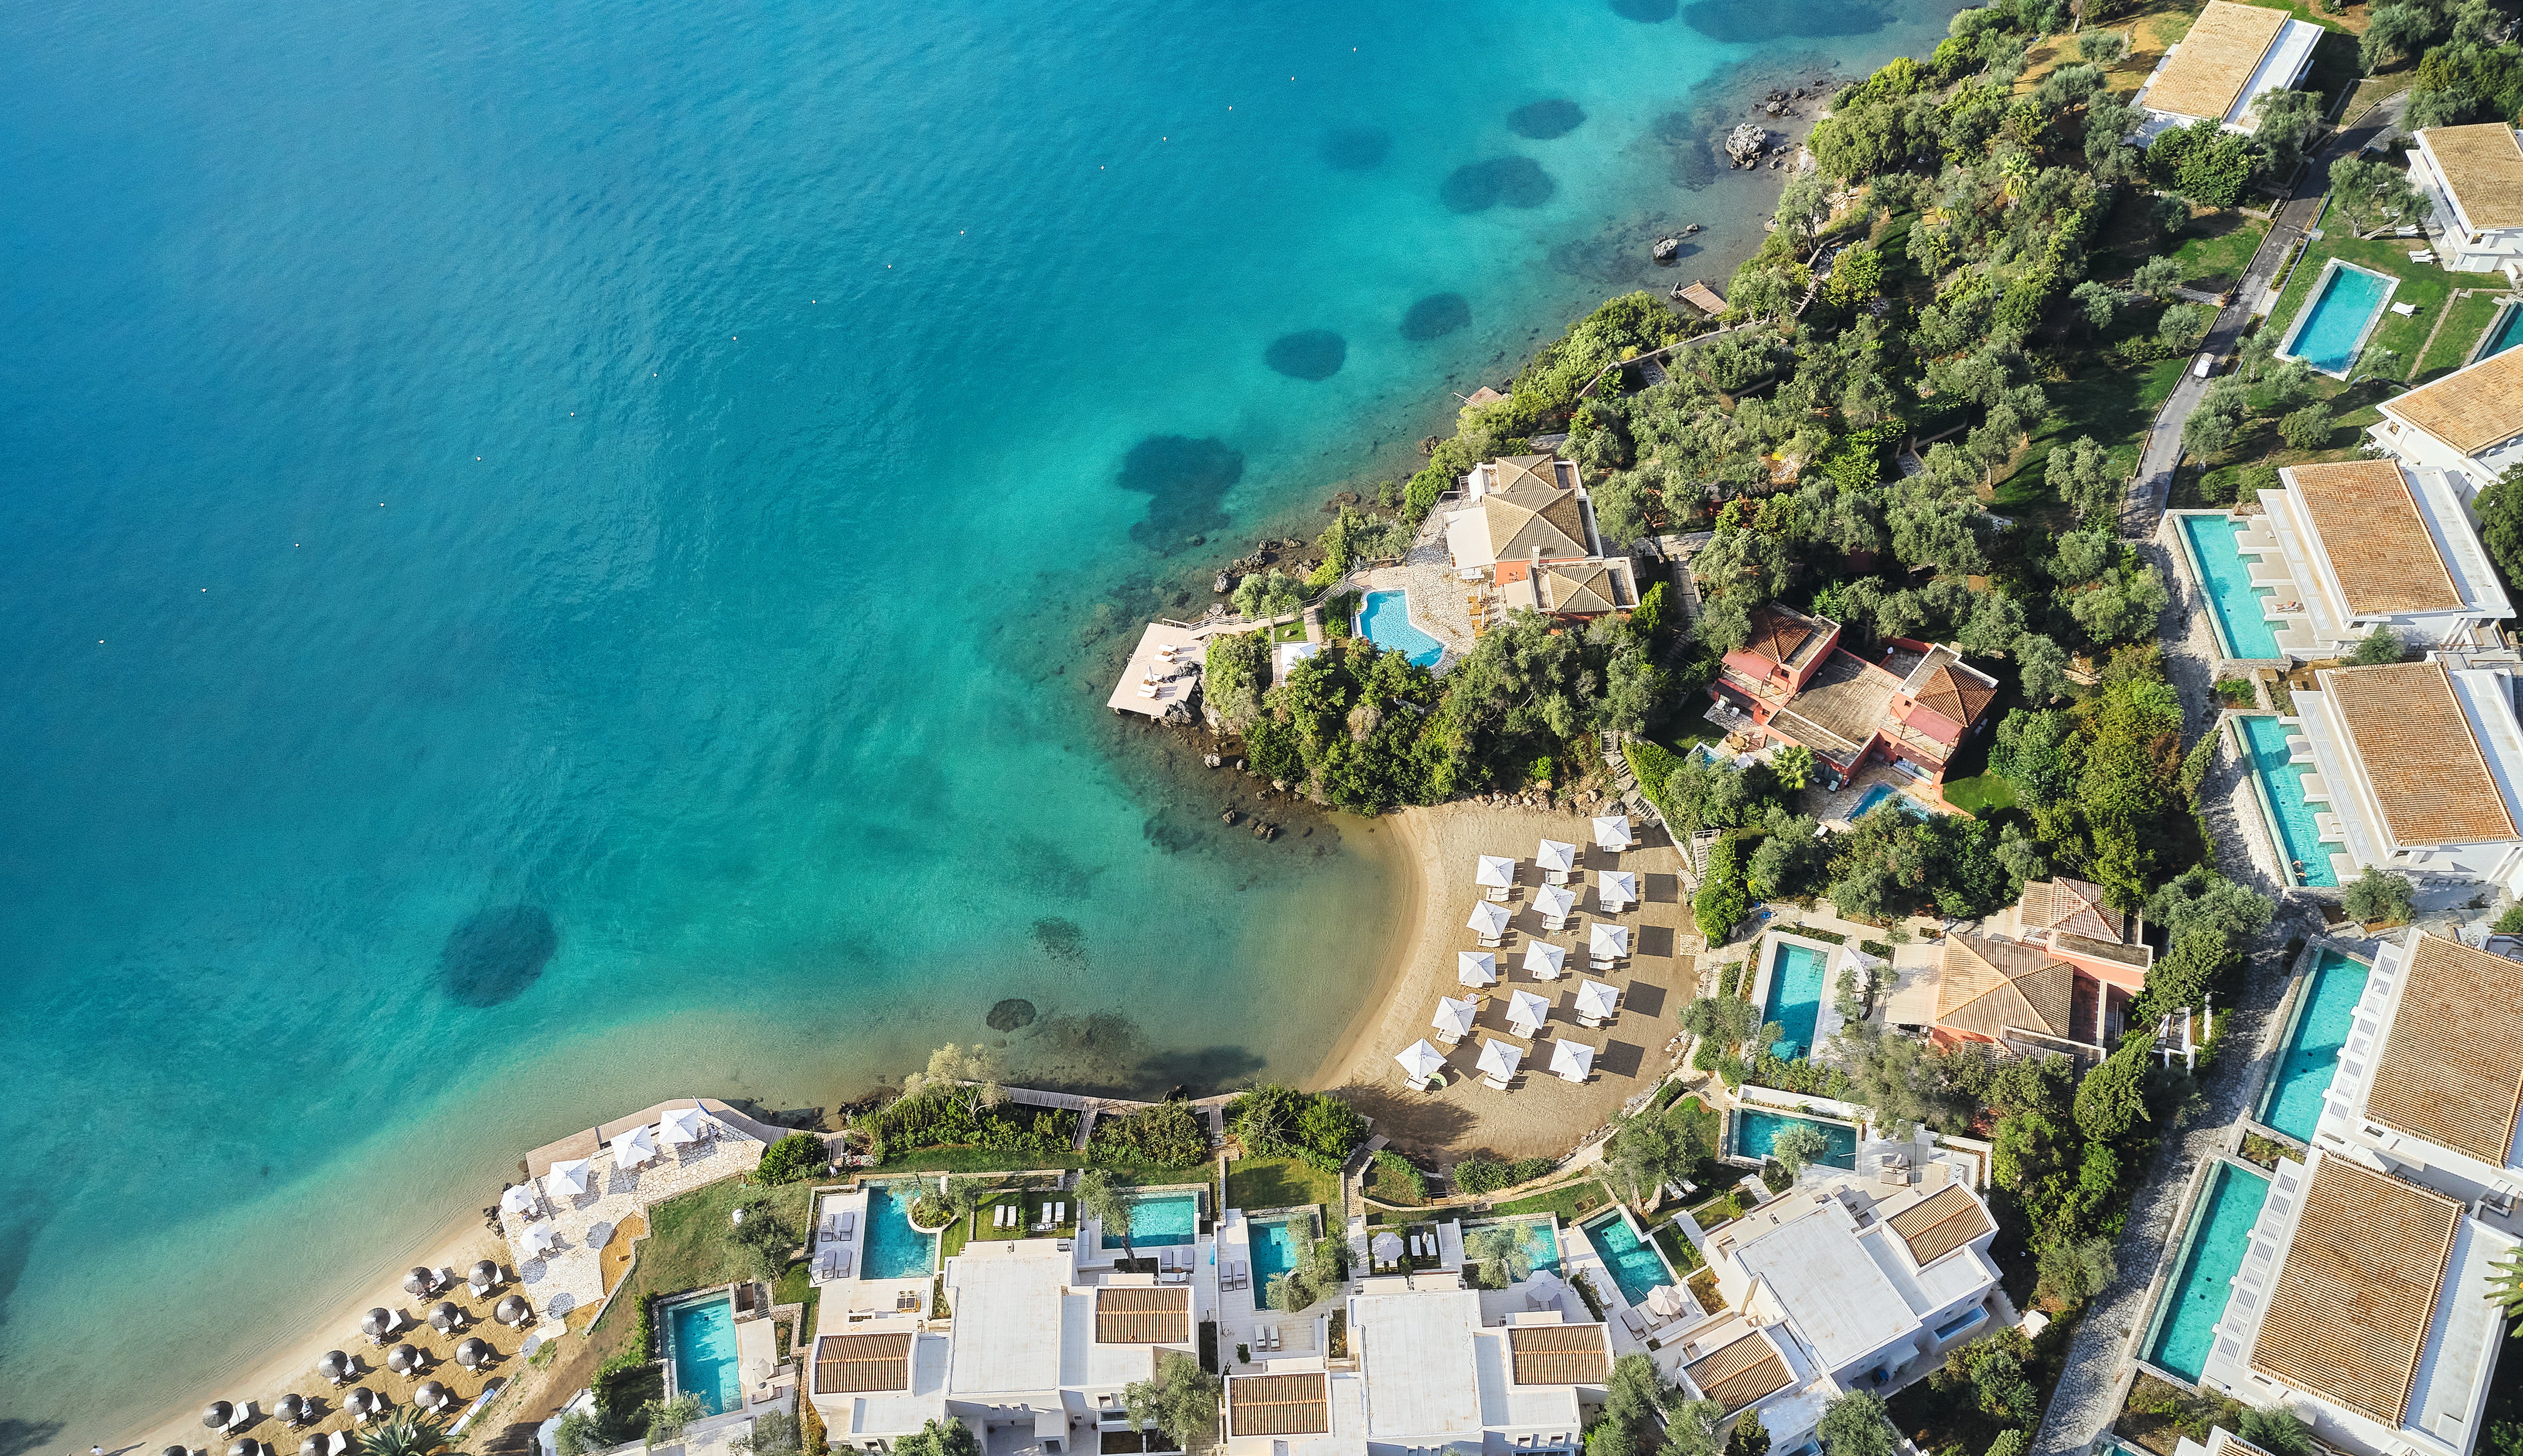 From crystalline waters to golden sands, enjoy nature and nurture with a luxury break in Greece